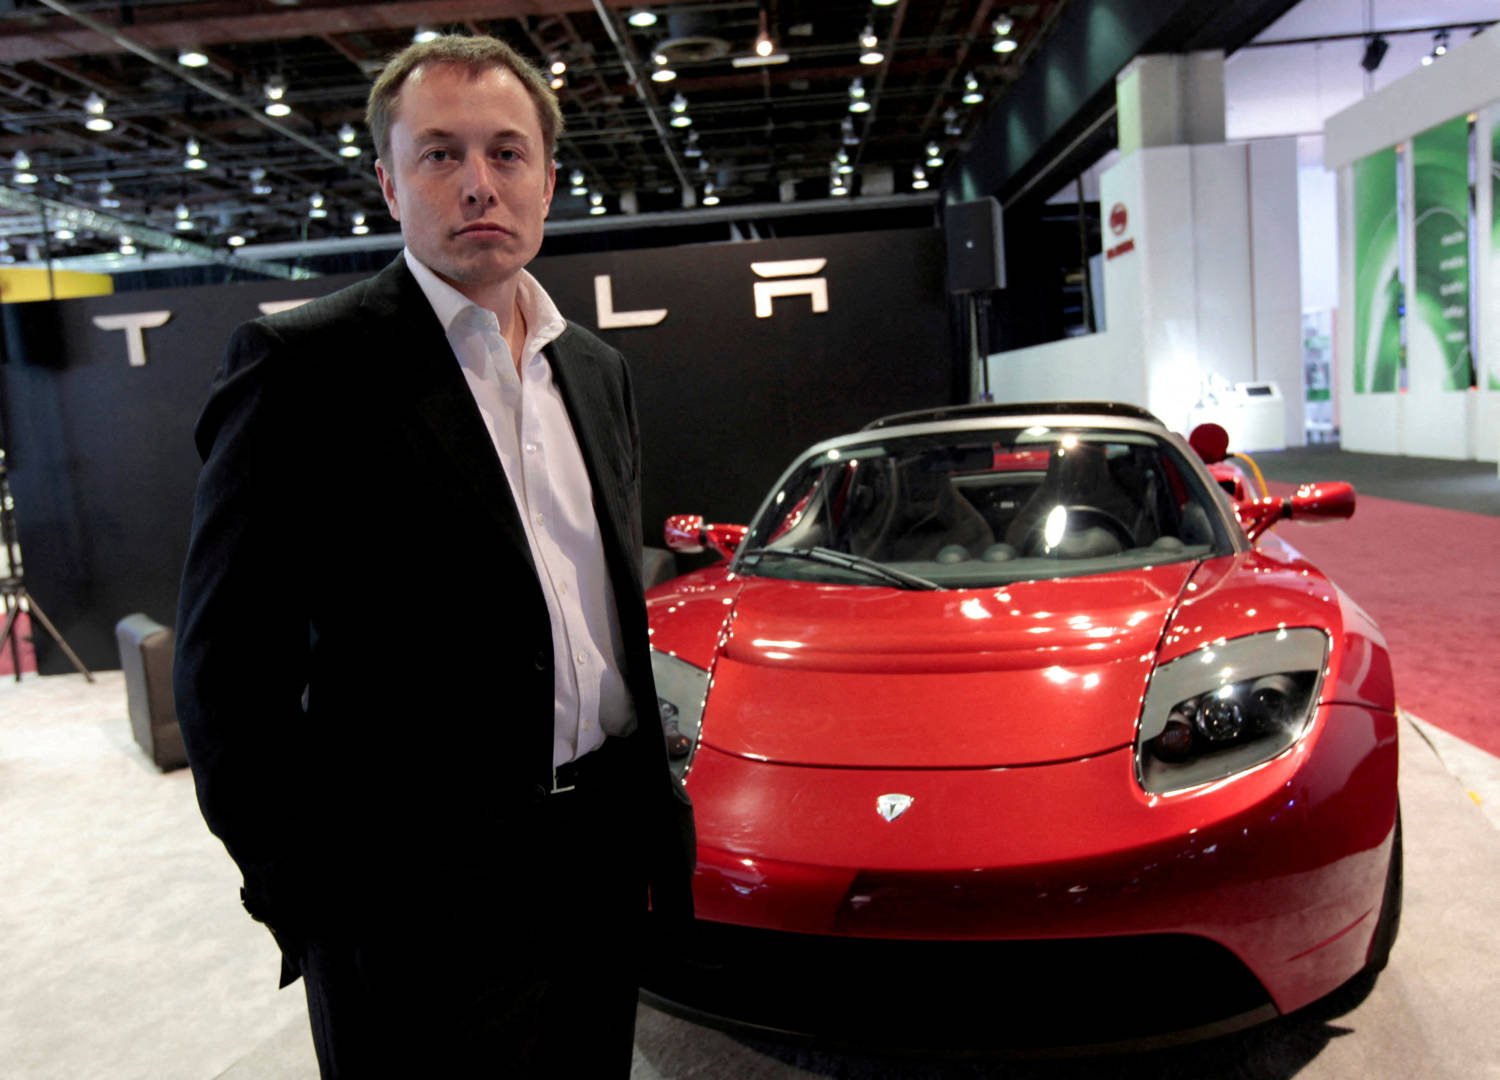 File Photo: Tesla Motors Inc. Ceo And Chairman Elon Musk Stands In Front Of The Tesla Roadster Electric Vehicle As He Addresses The Media During Press Days Of The North American International Auto Show In Detroit